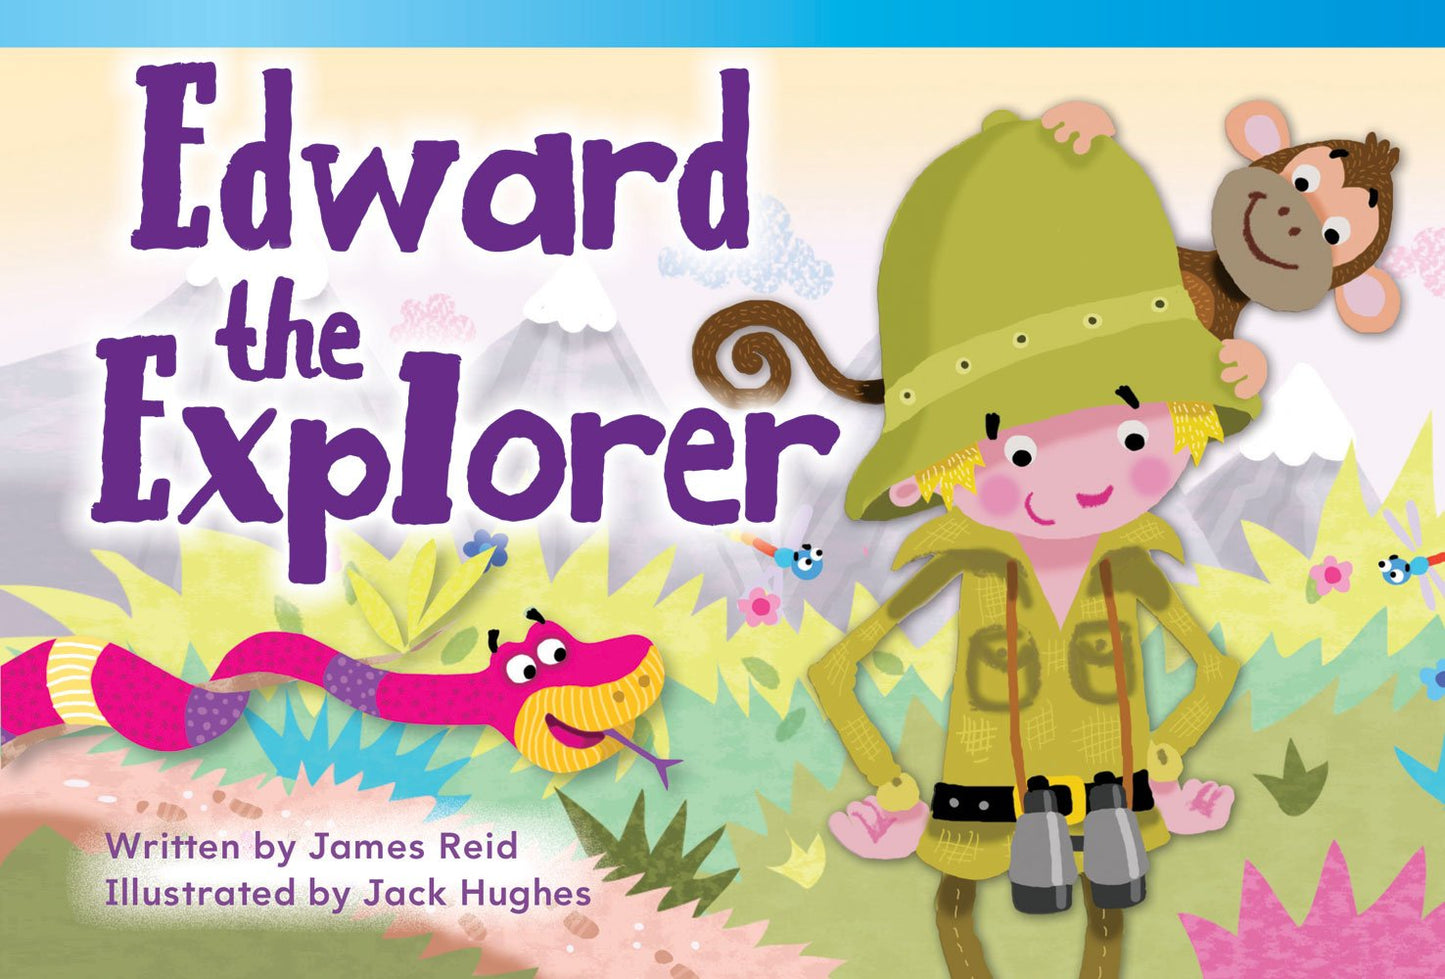 Teacher Created Materials - Literary Text: Edward the Explorer - Grade 1 - Guided Reading Level D Paperback